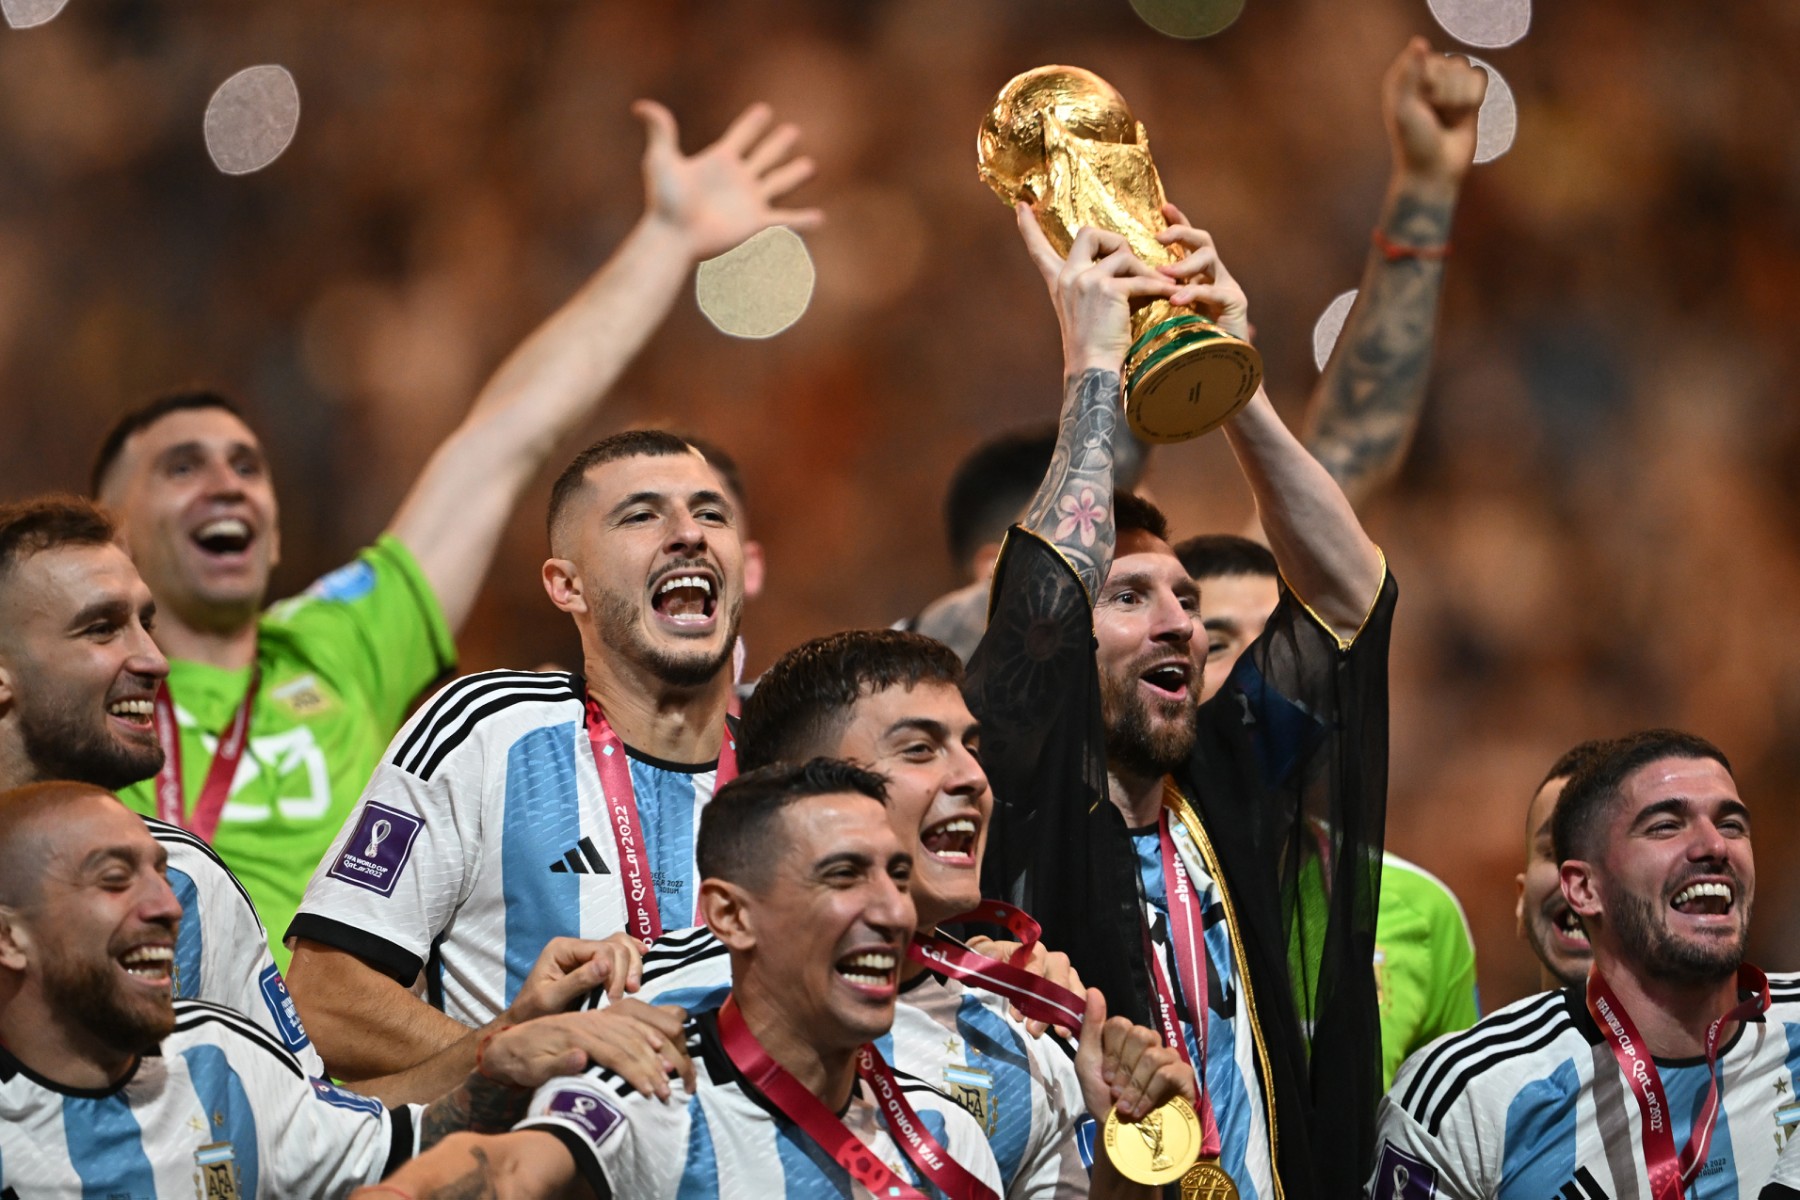 PHOTOS: 'We're world champions', Messi cries as he lifts World Cup with Argentina